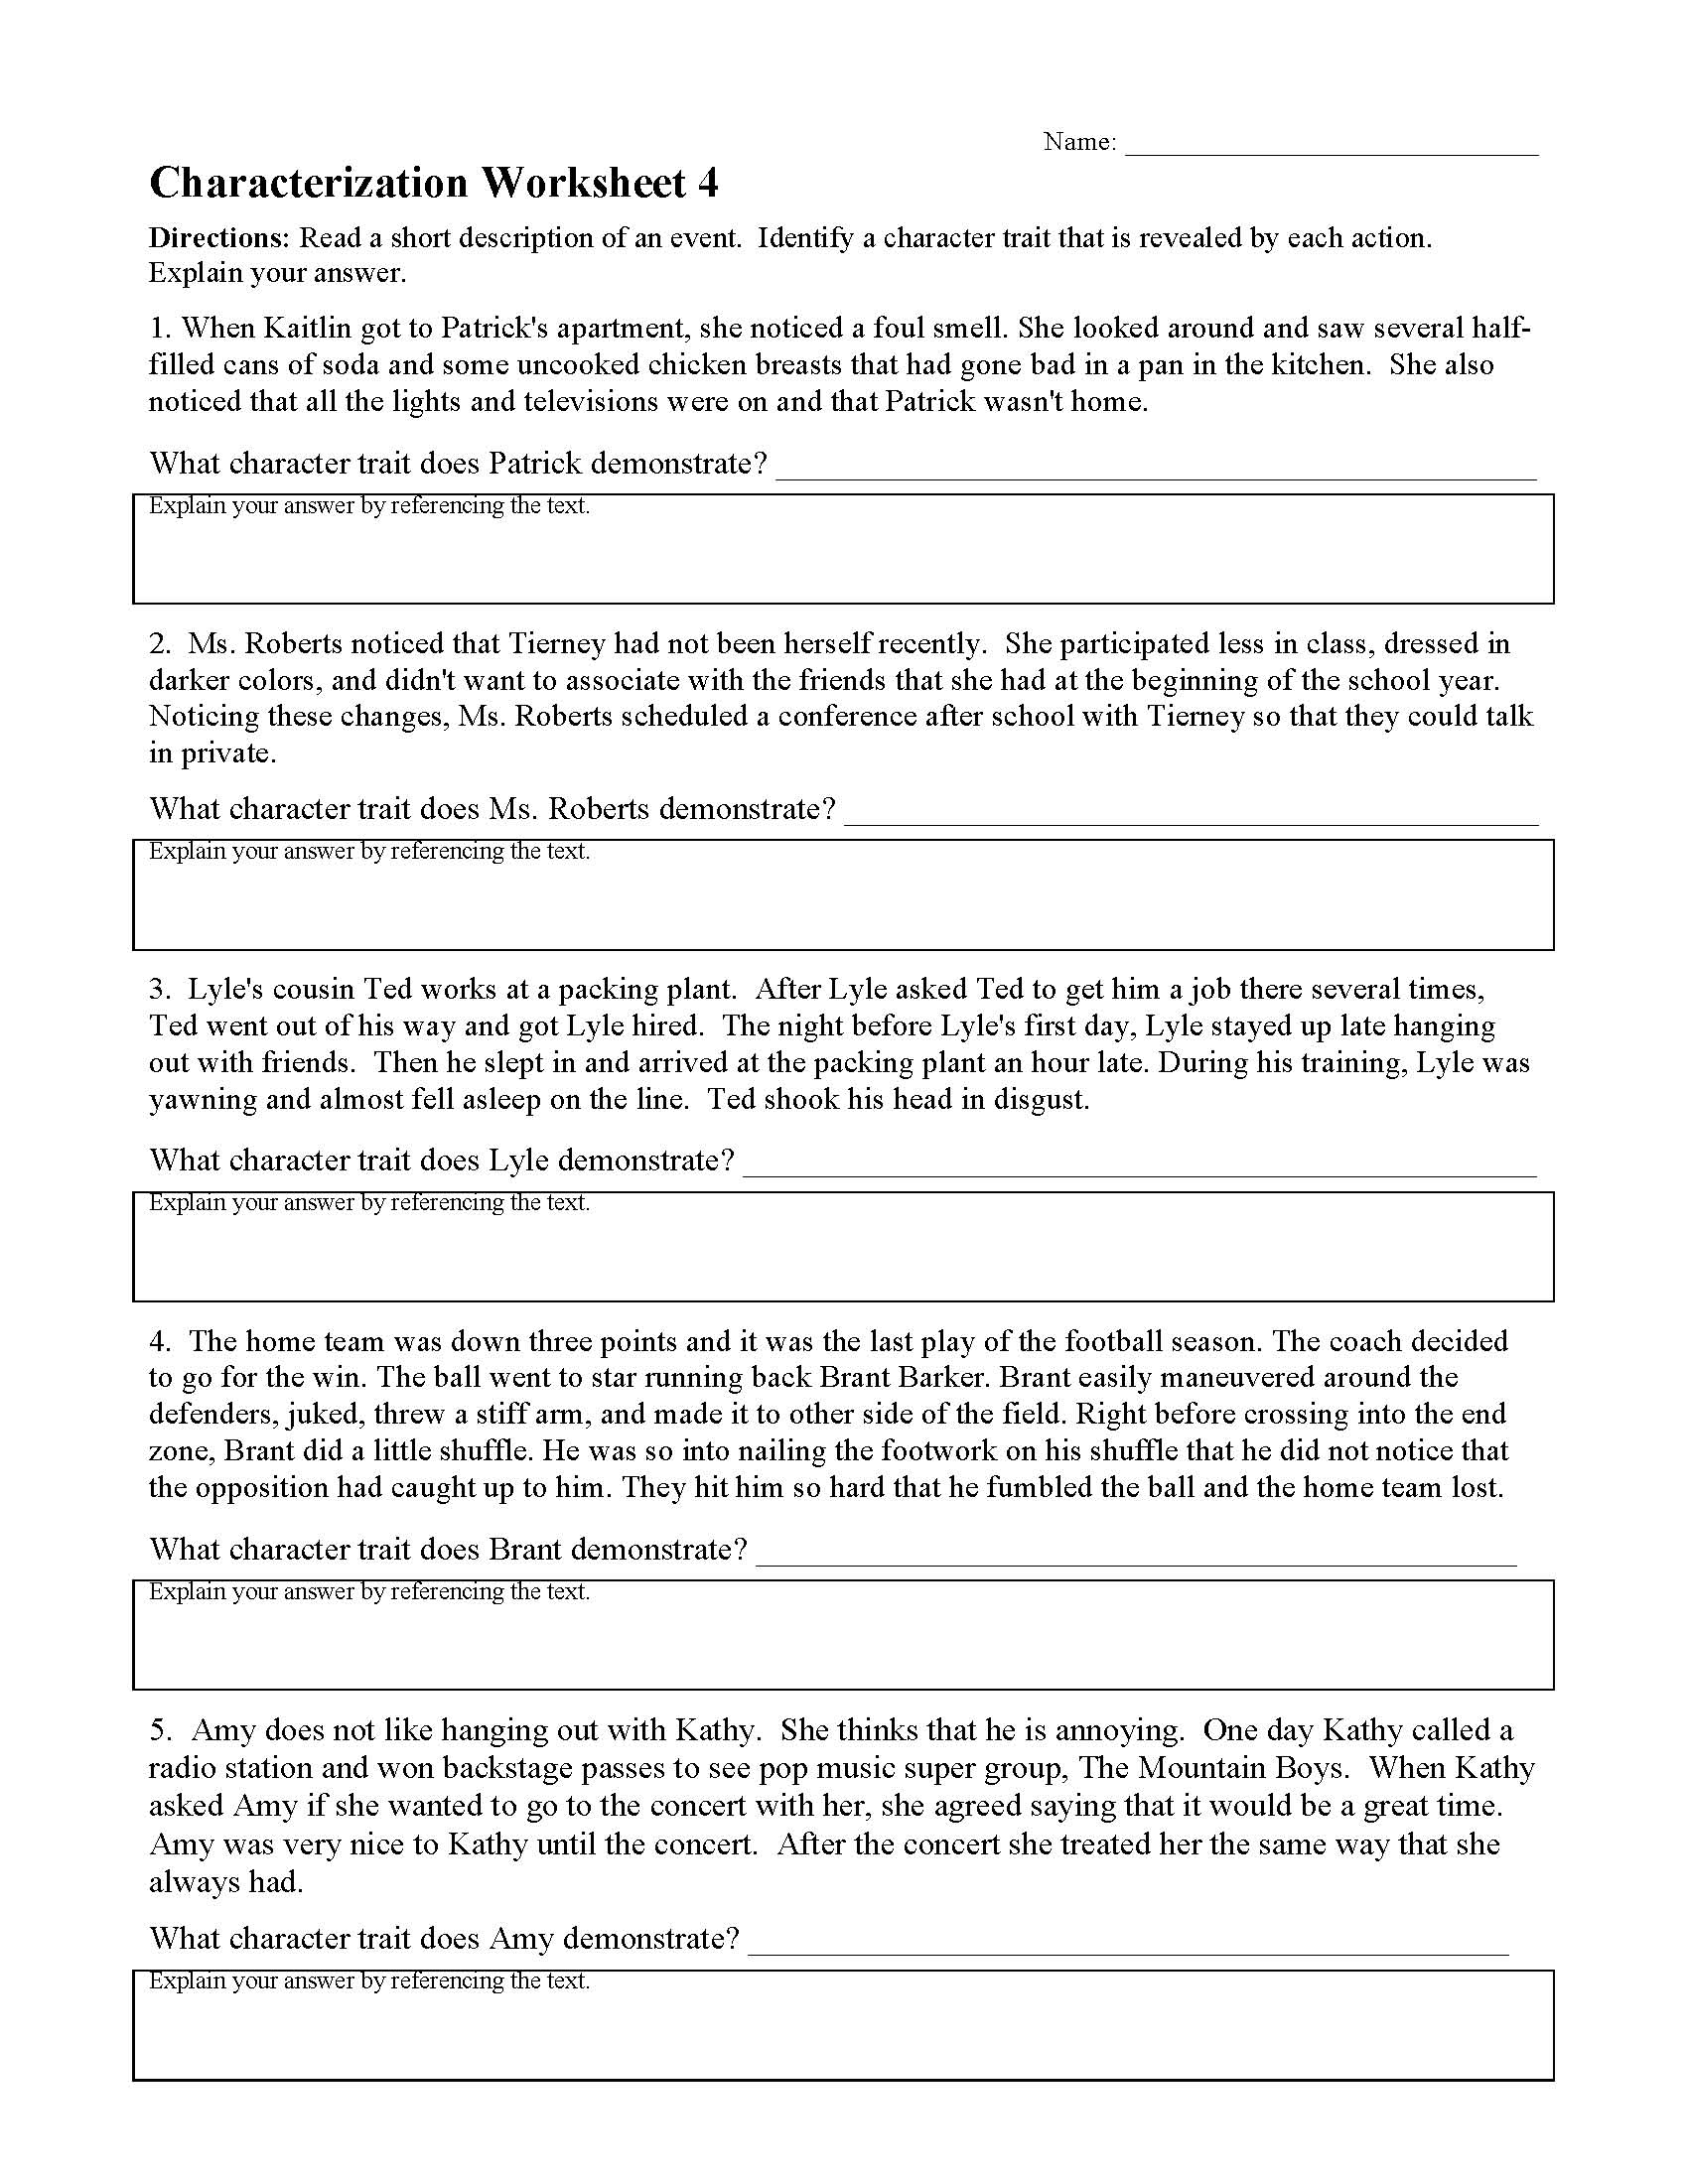 This is a preview image of Characterization Worksheet 4. Click on it to enlarge it or view the source file.